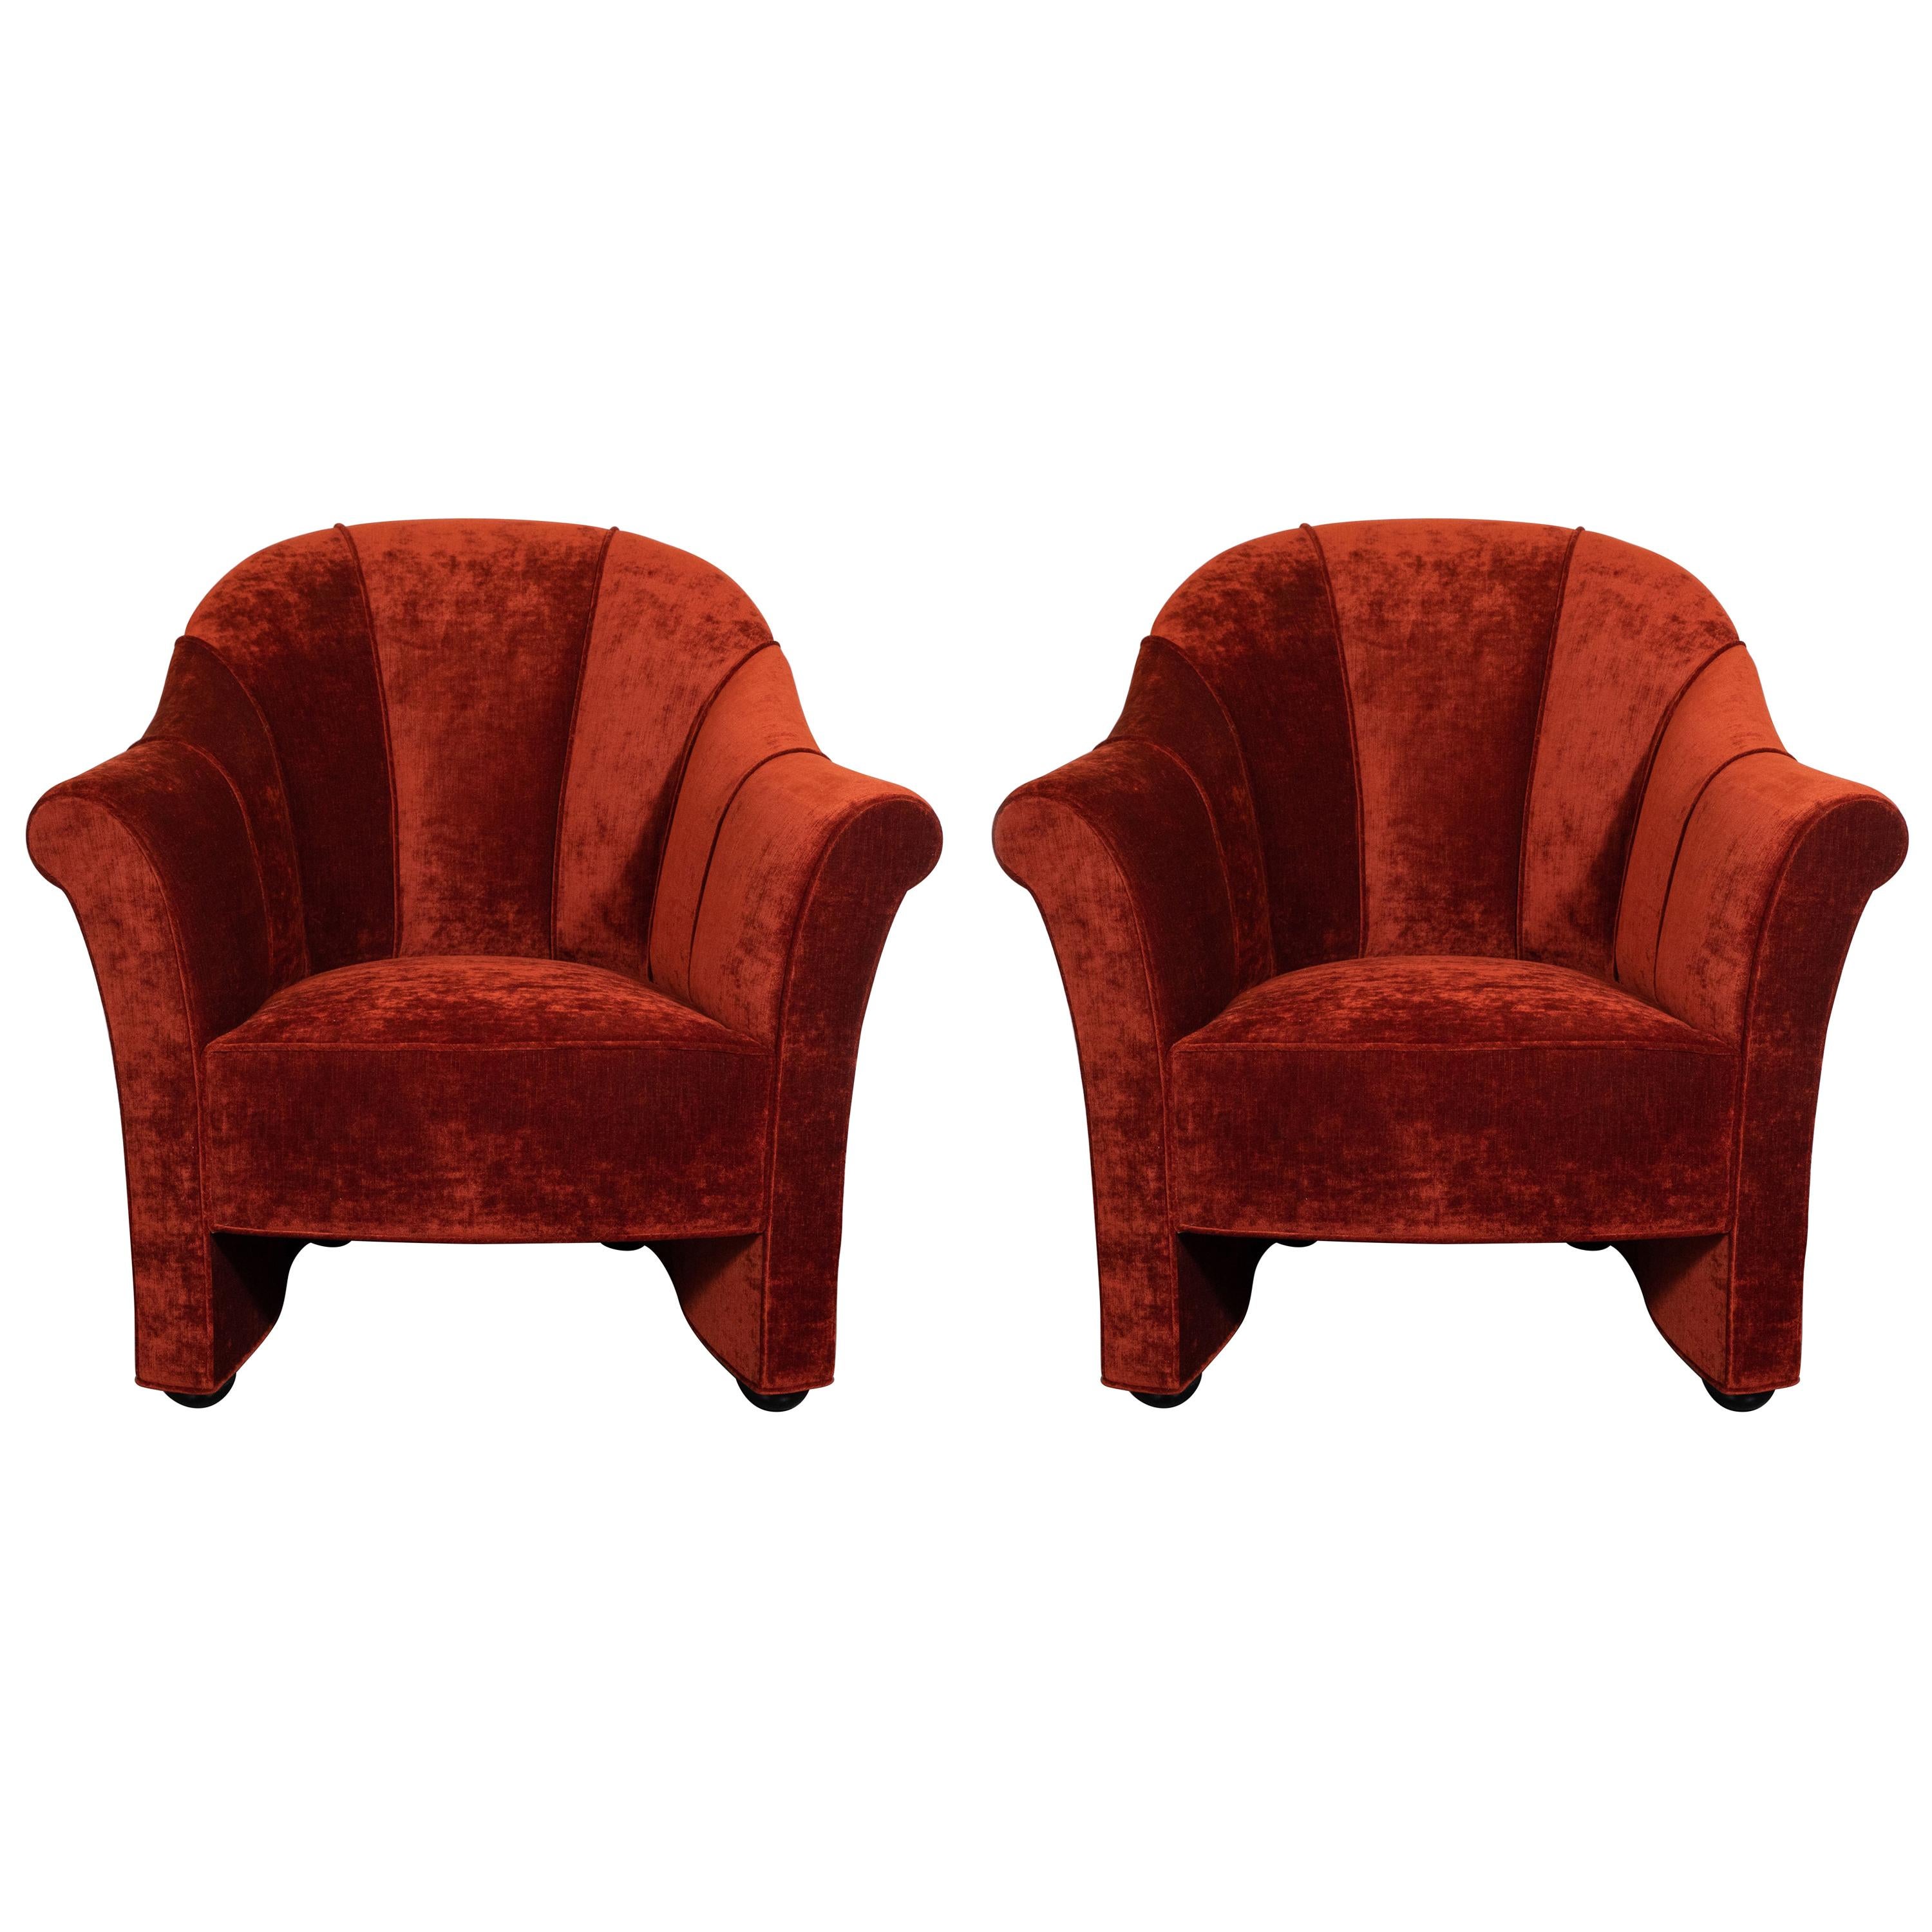 Pair of Channel Back Lounge Chairs in Smoked Ruby Velvet by Josef Hoffman